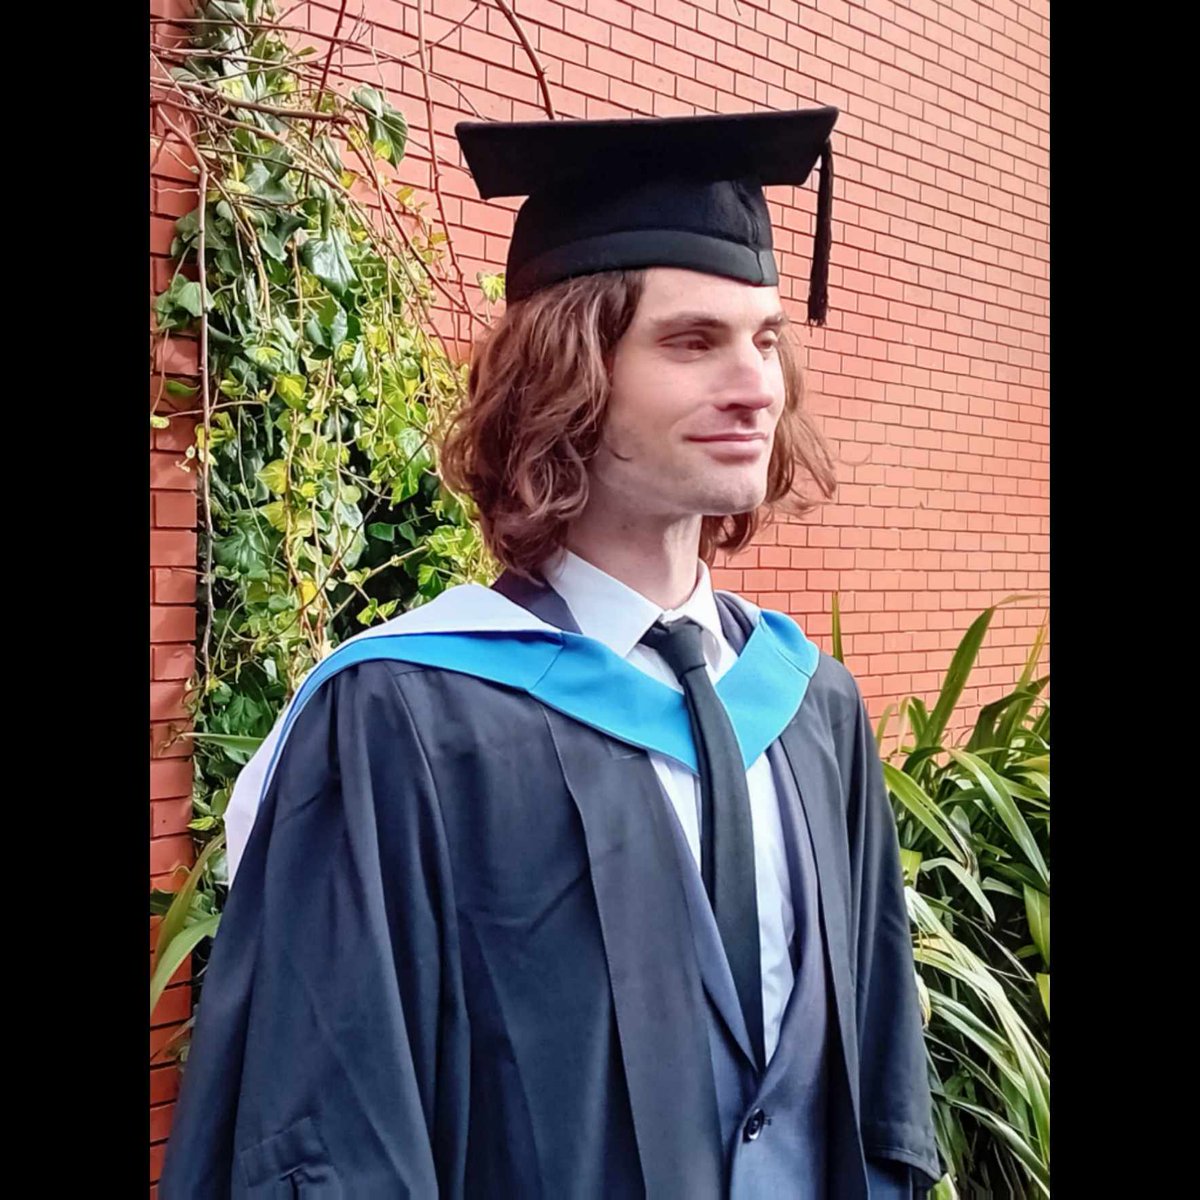 I just graduated with a #masters degree in #music composition from @BIMM_Institute I had a real opportunity to learn. The lecturers and other students were really nice. Thank you to everyone. Peace + love. David Robinson aka @coldheartrevue #graduation #Brighton